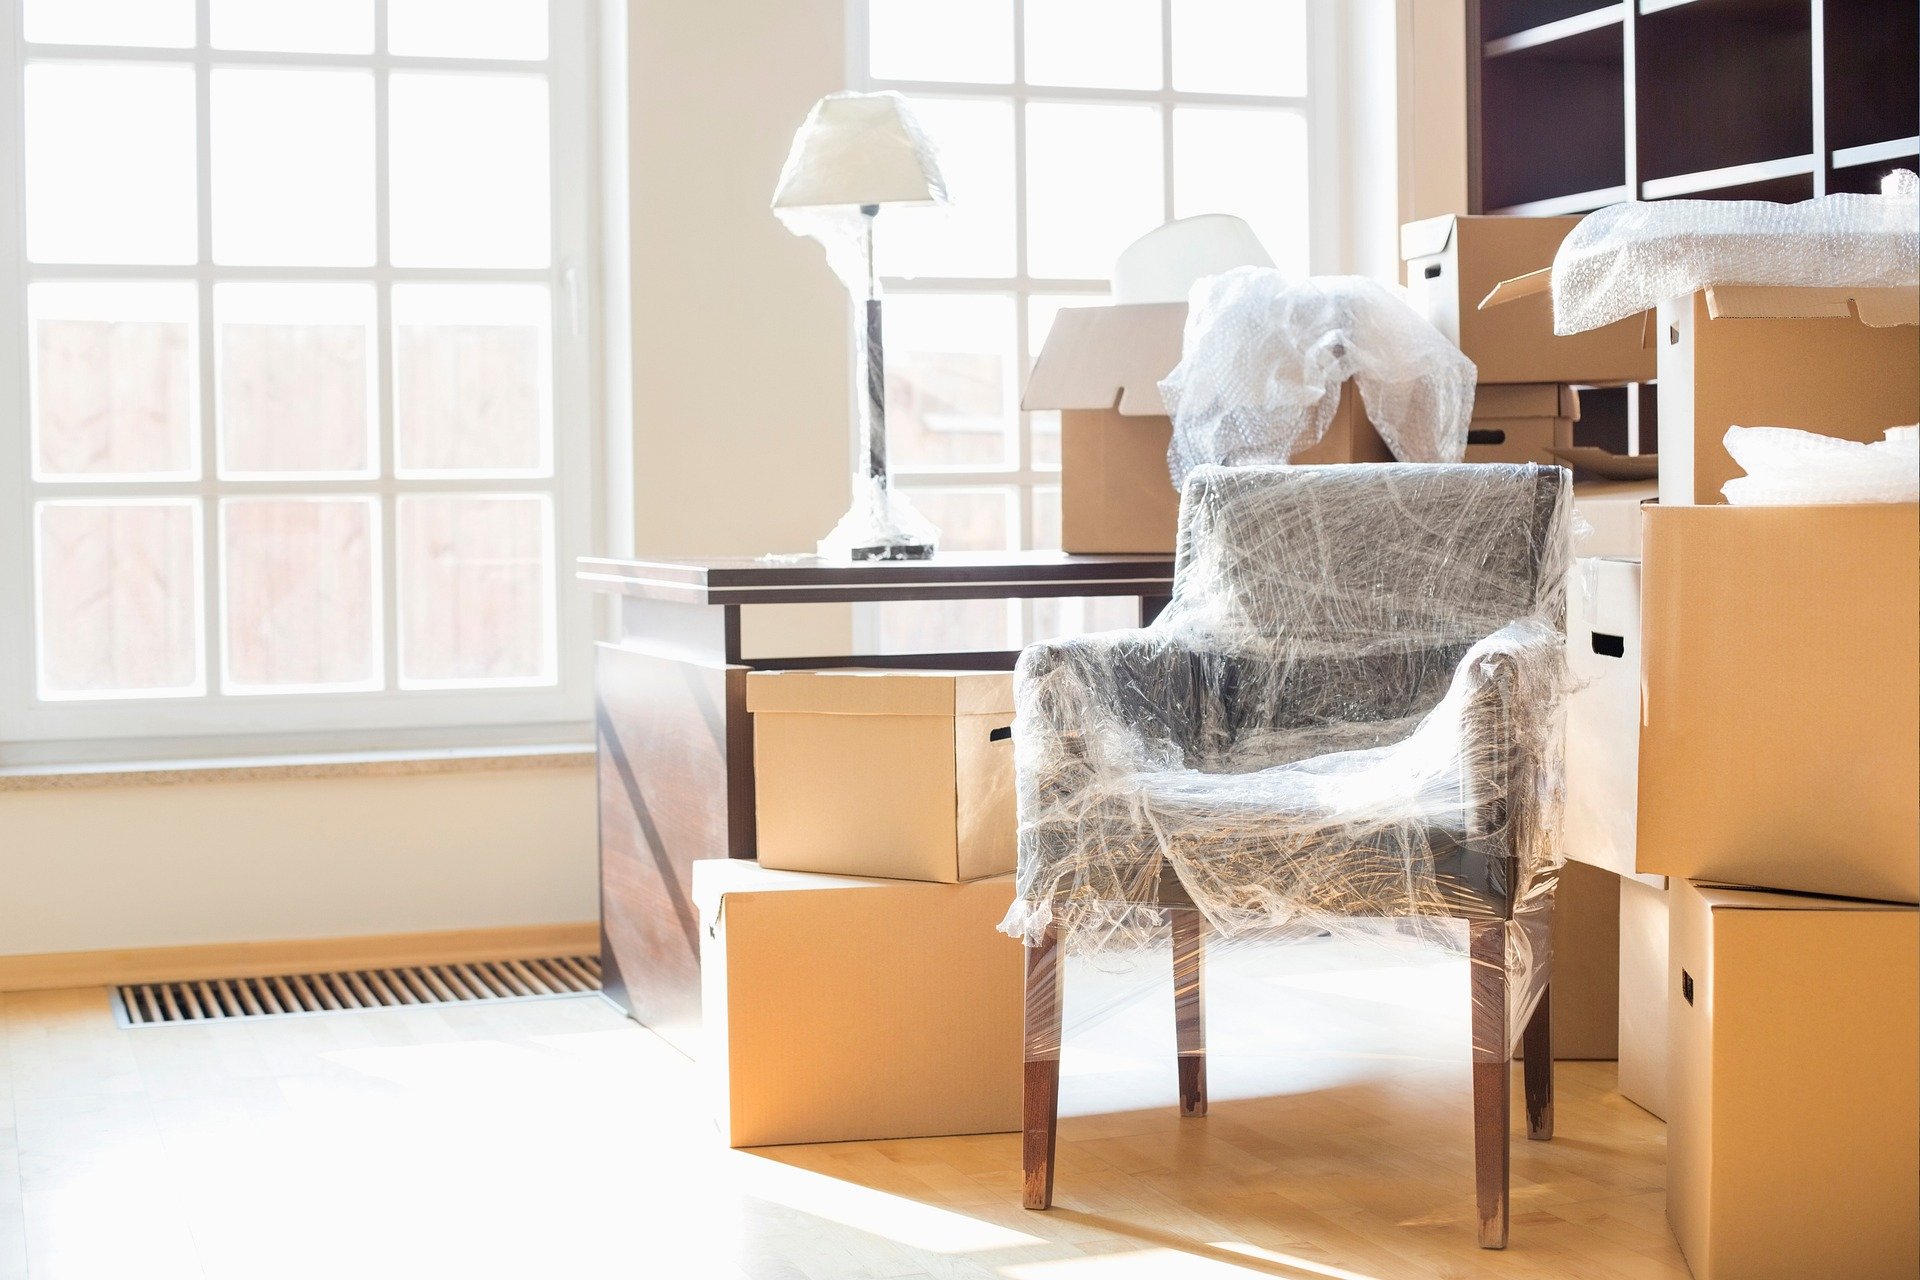 Top Tips for Moving with Kids and Pets